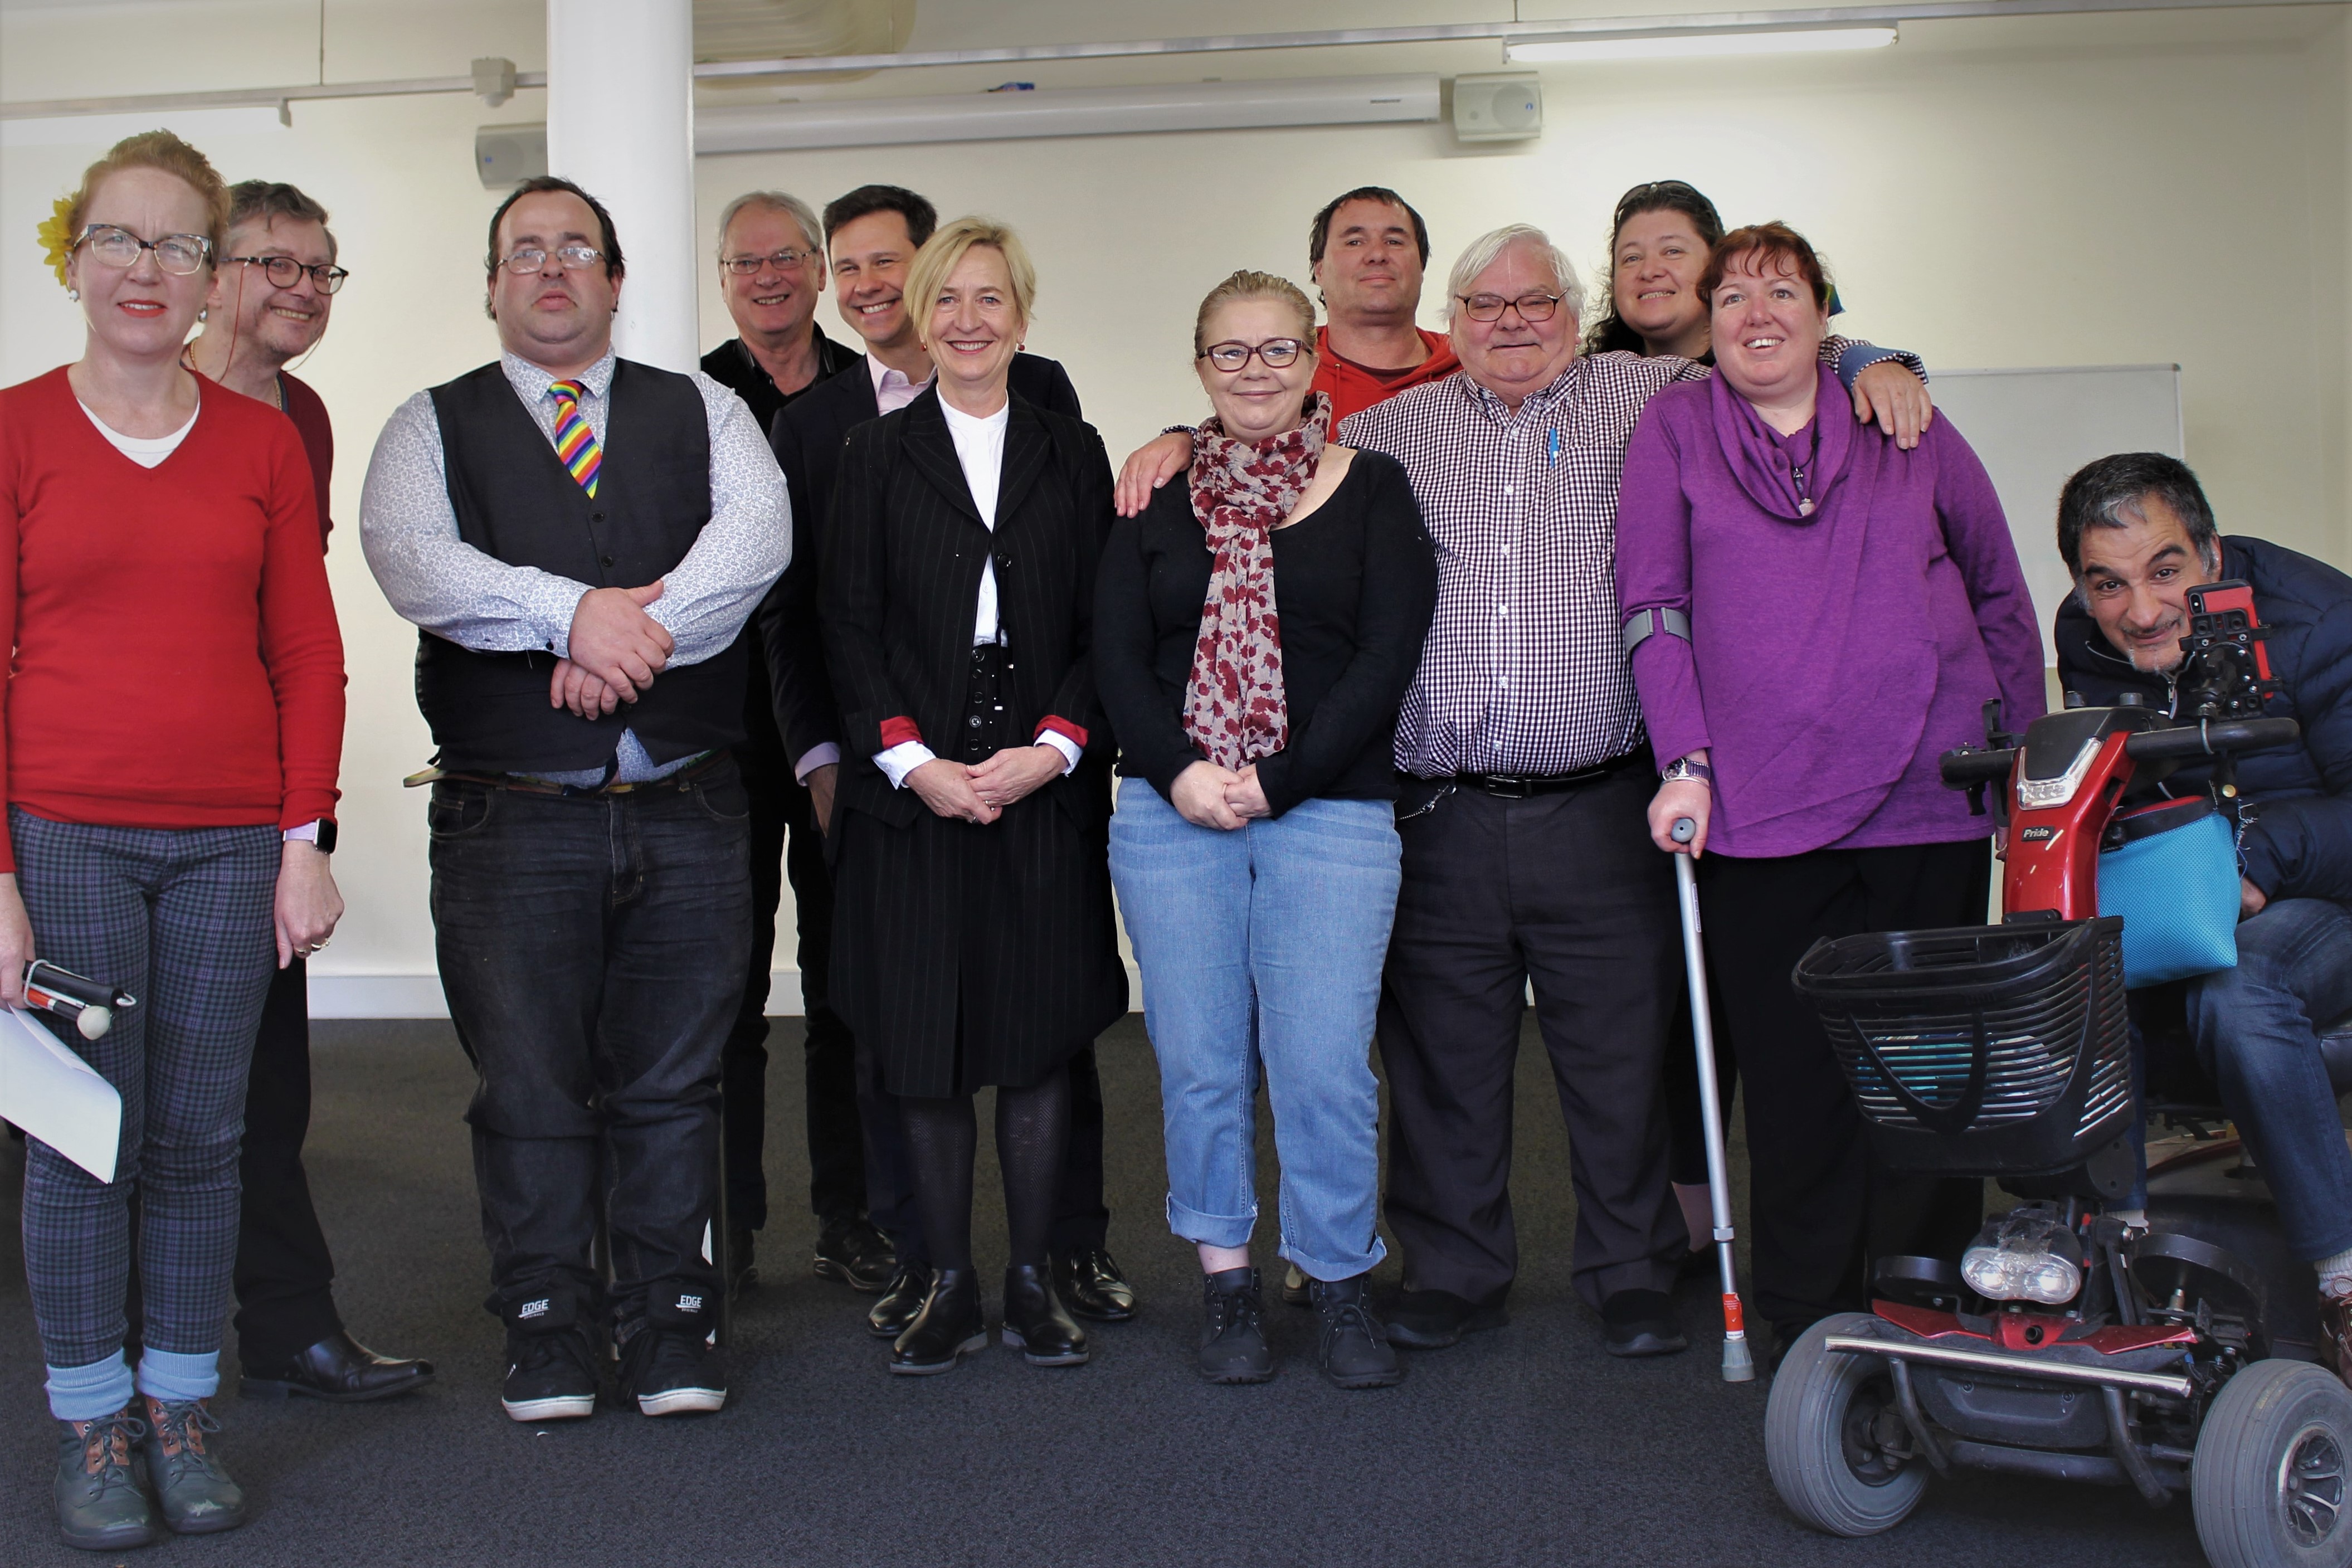 NDIS Self Advocacy Working Group meets with NDIA Representatives